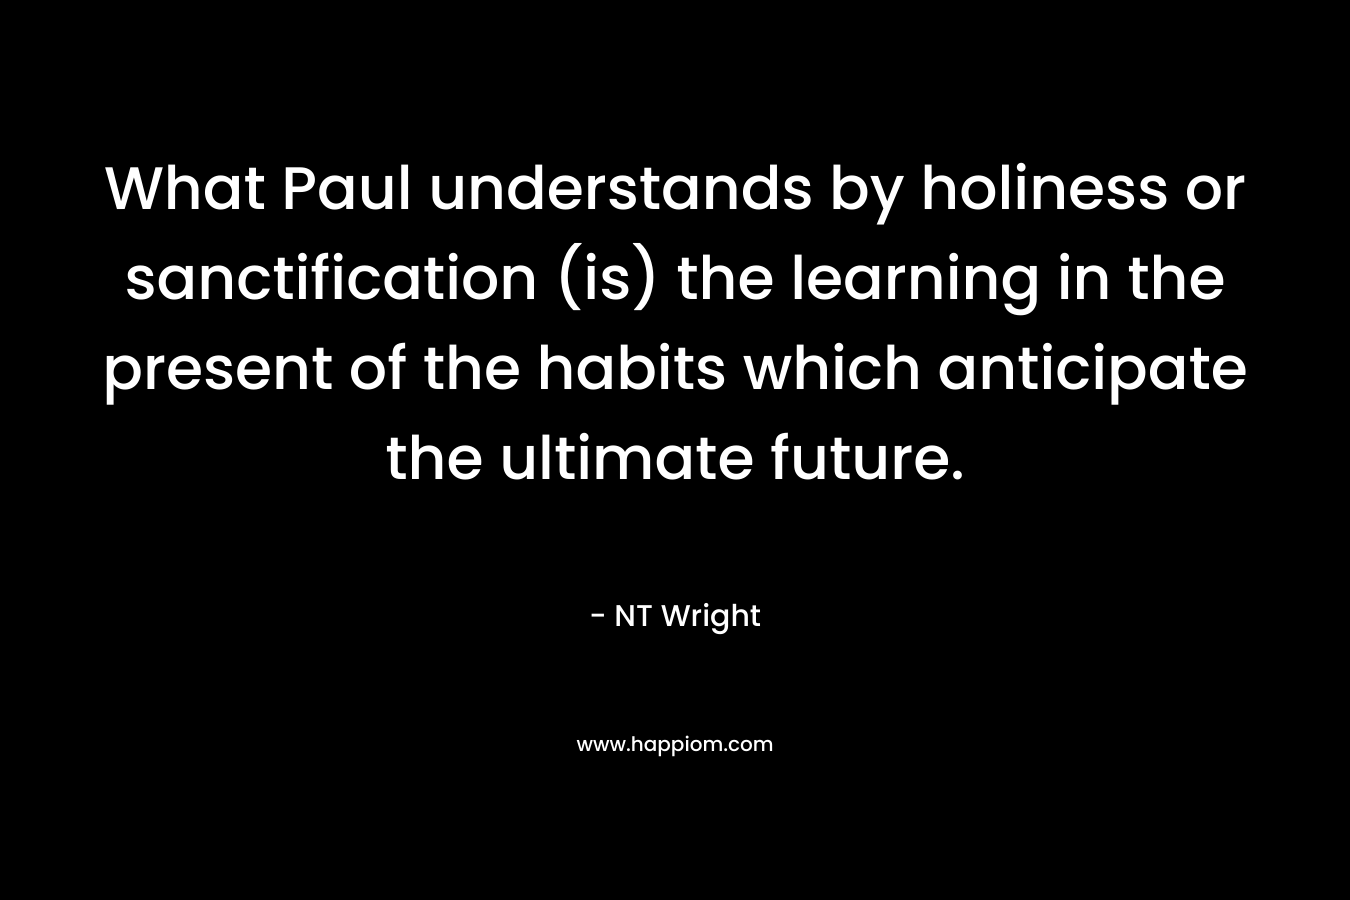 What Paul understands by holiness or sanctification (is) the learning in the present of the habits which anticipate the ultimate future.